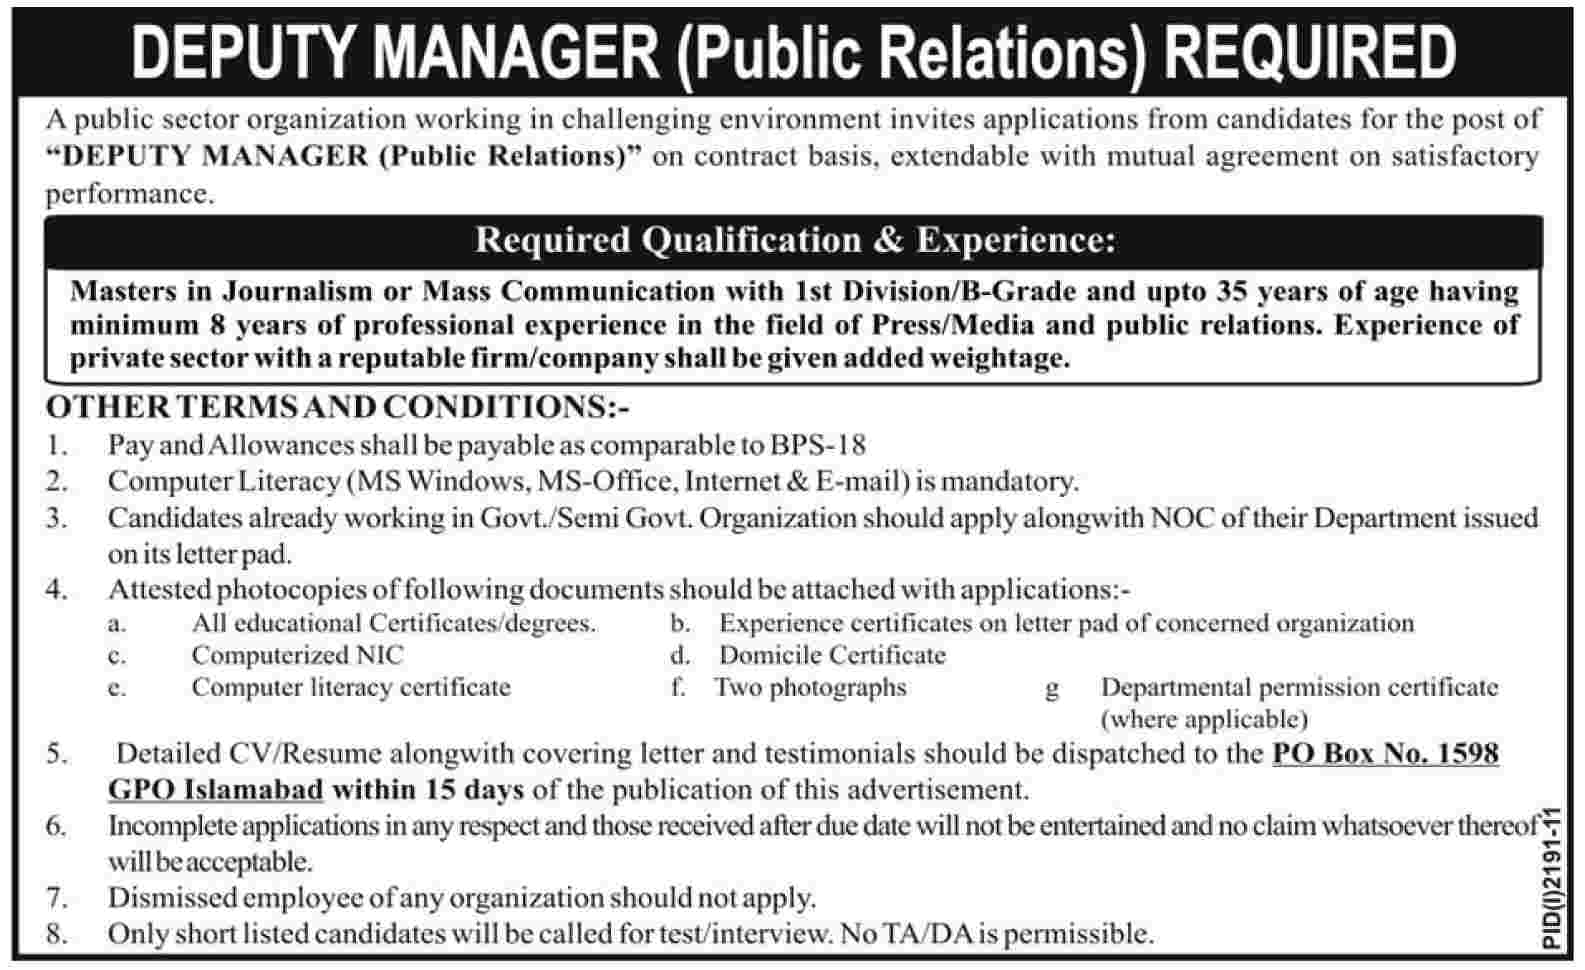 Deputy Manager Required by a Public Sector Organization